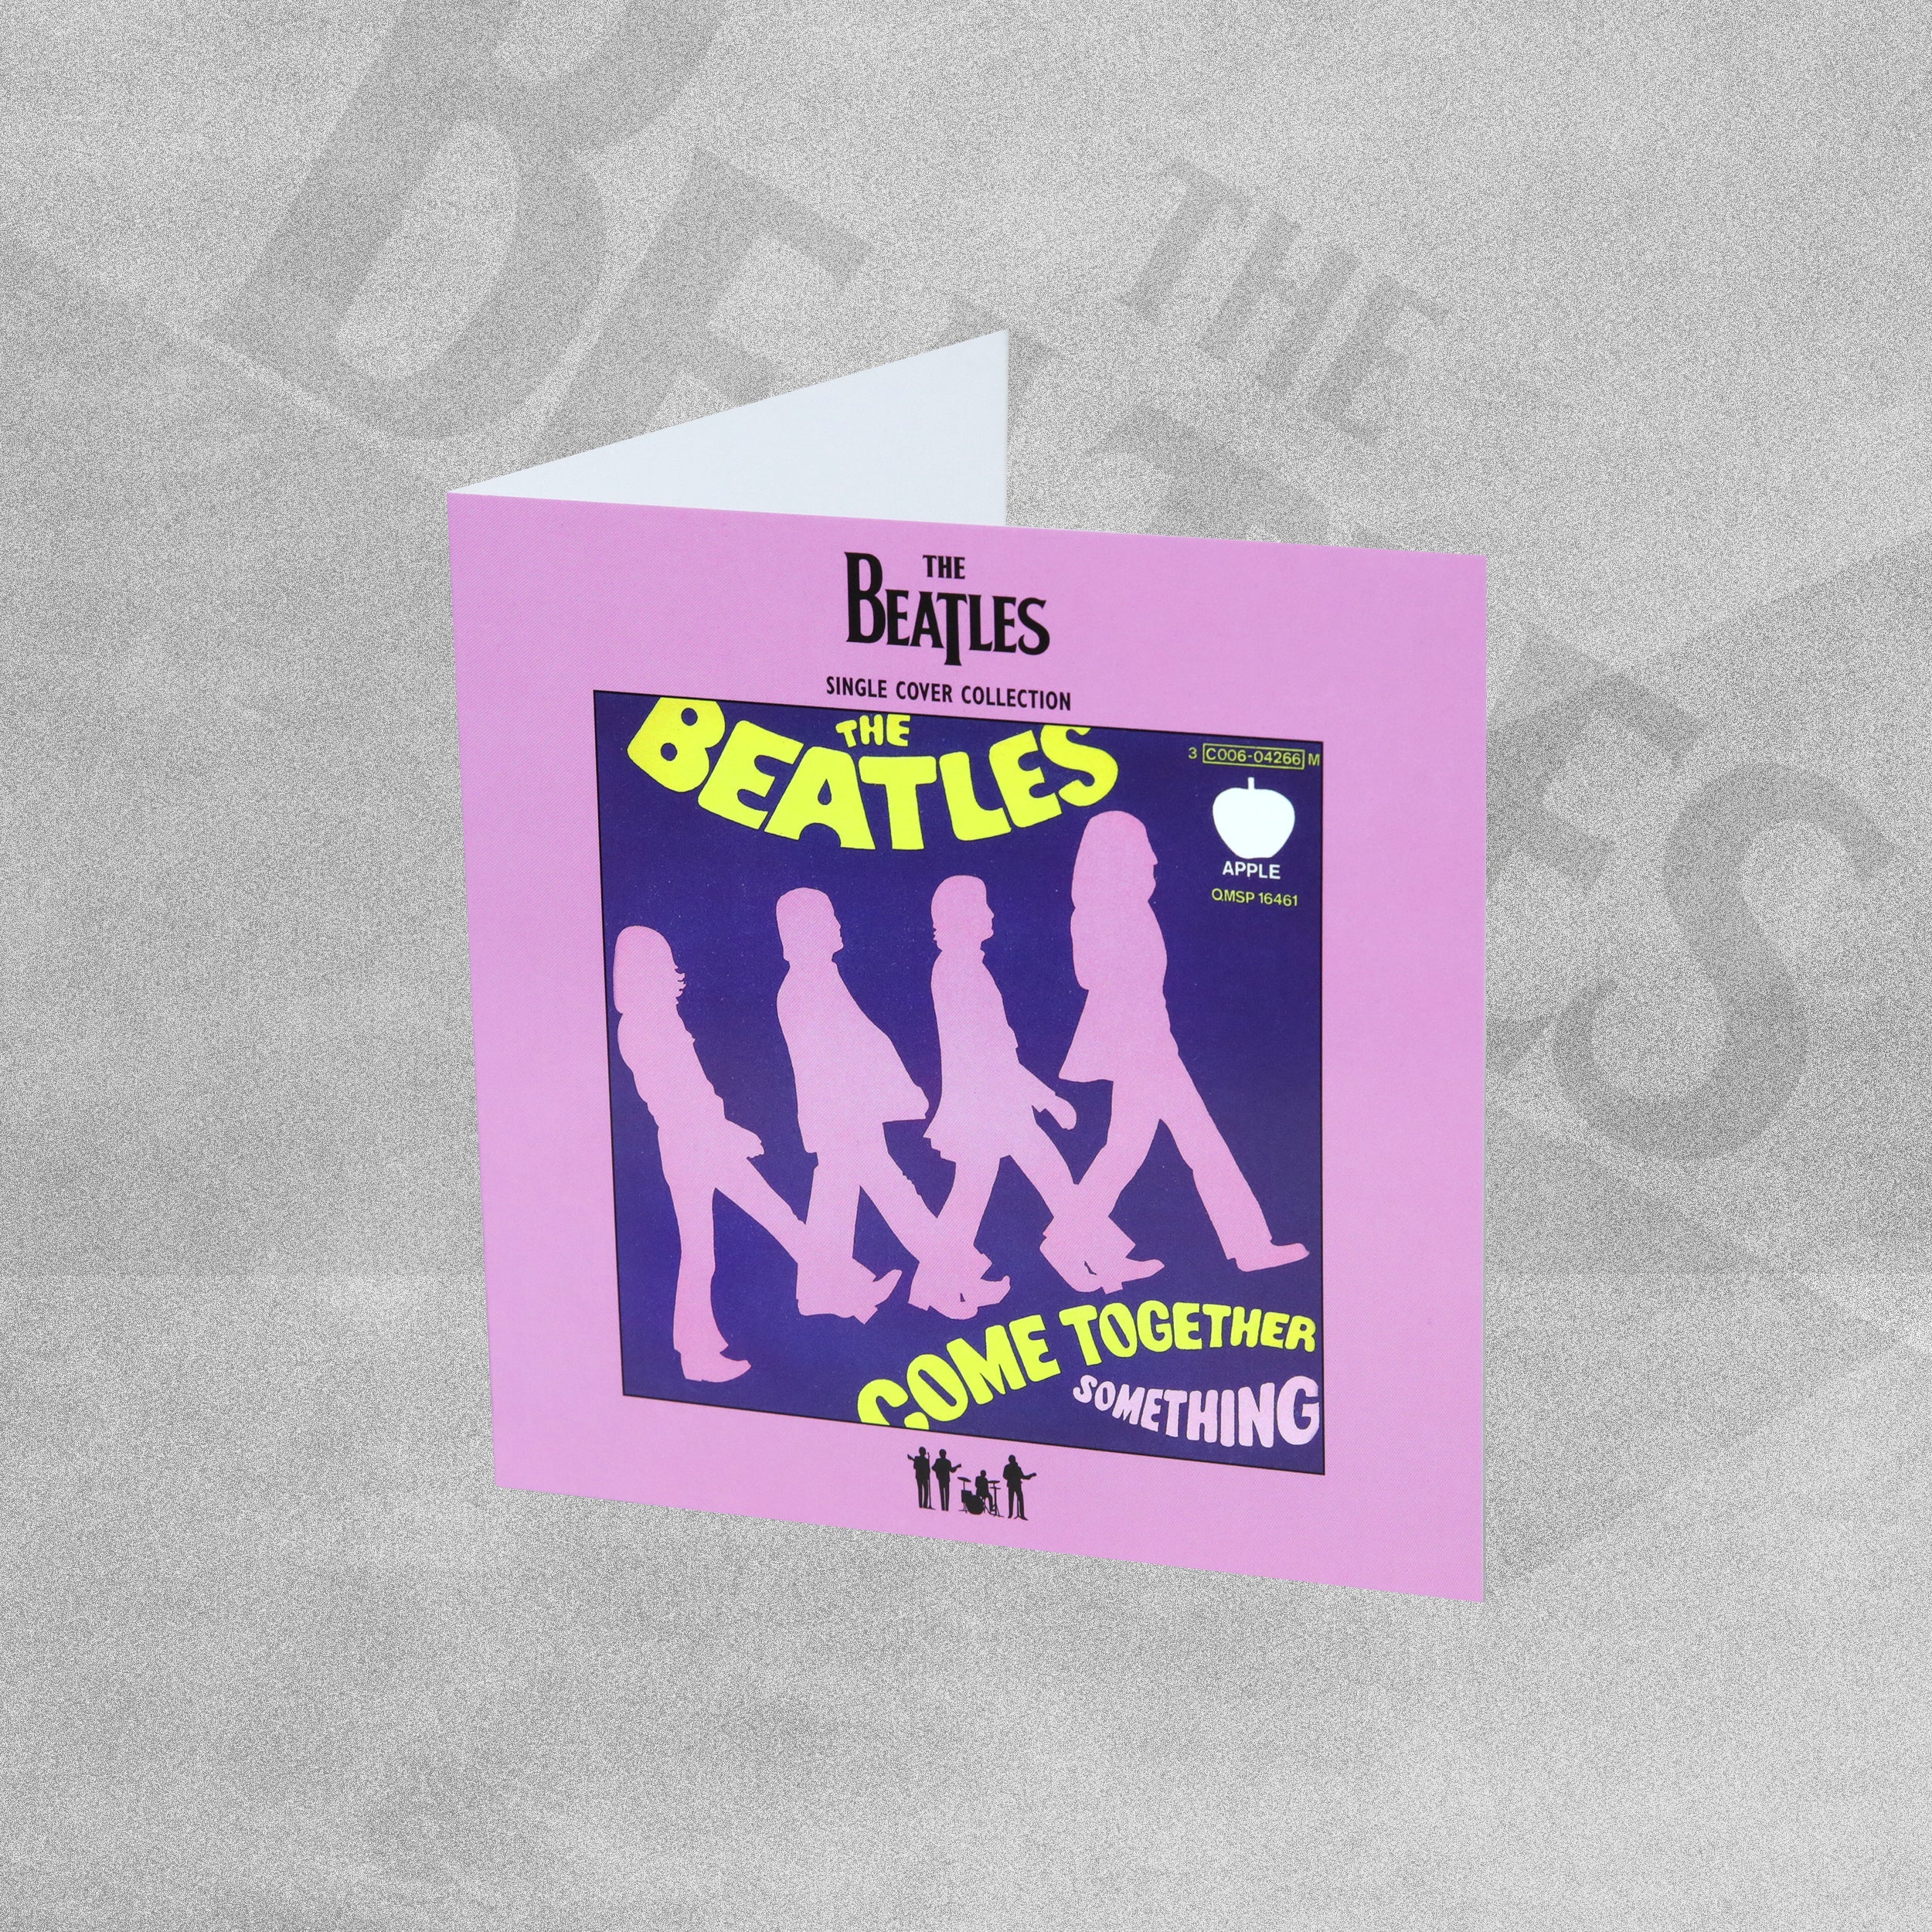 The Beatles Single Cover Collection Greeting Card - Come Together